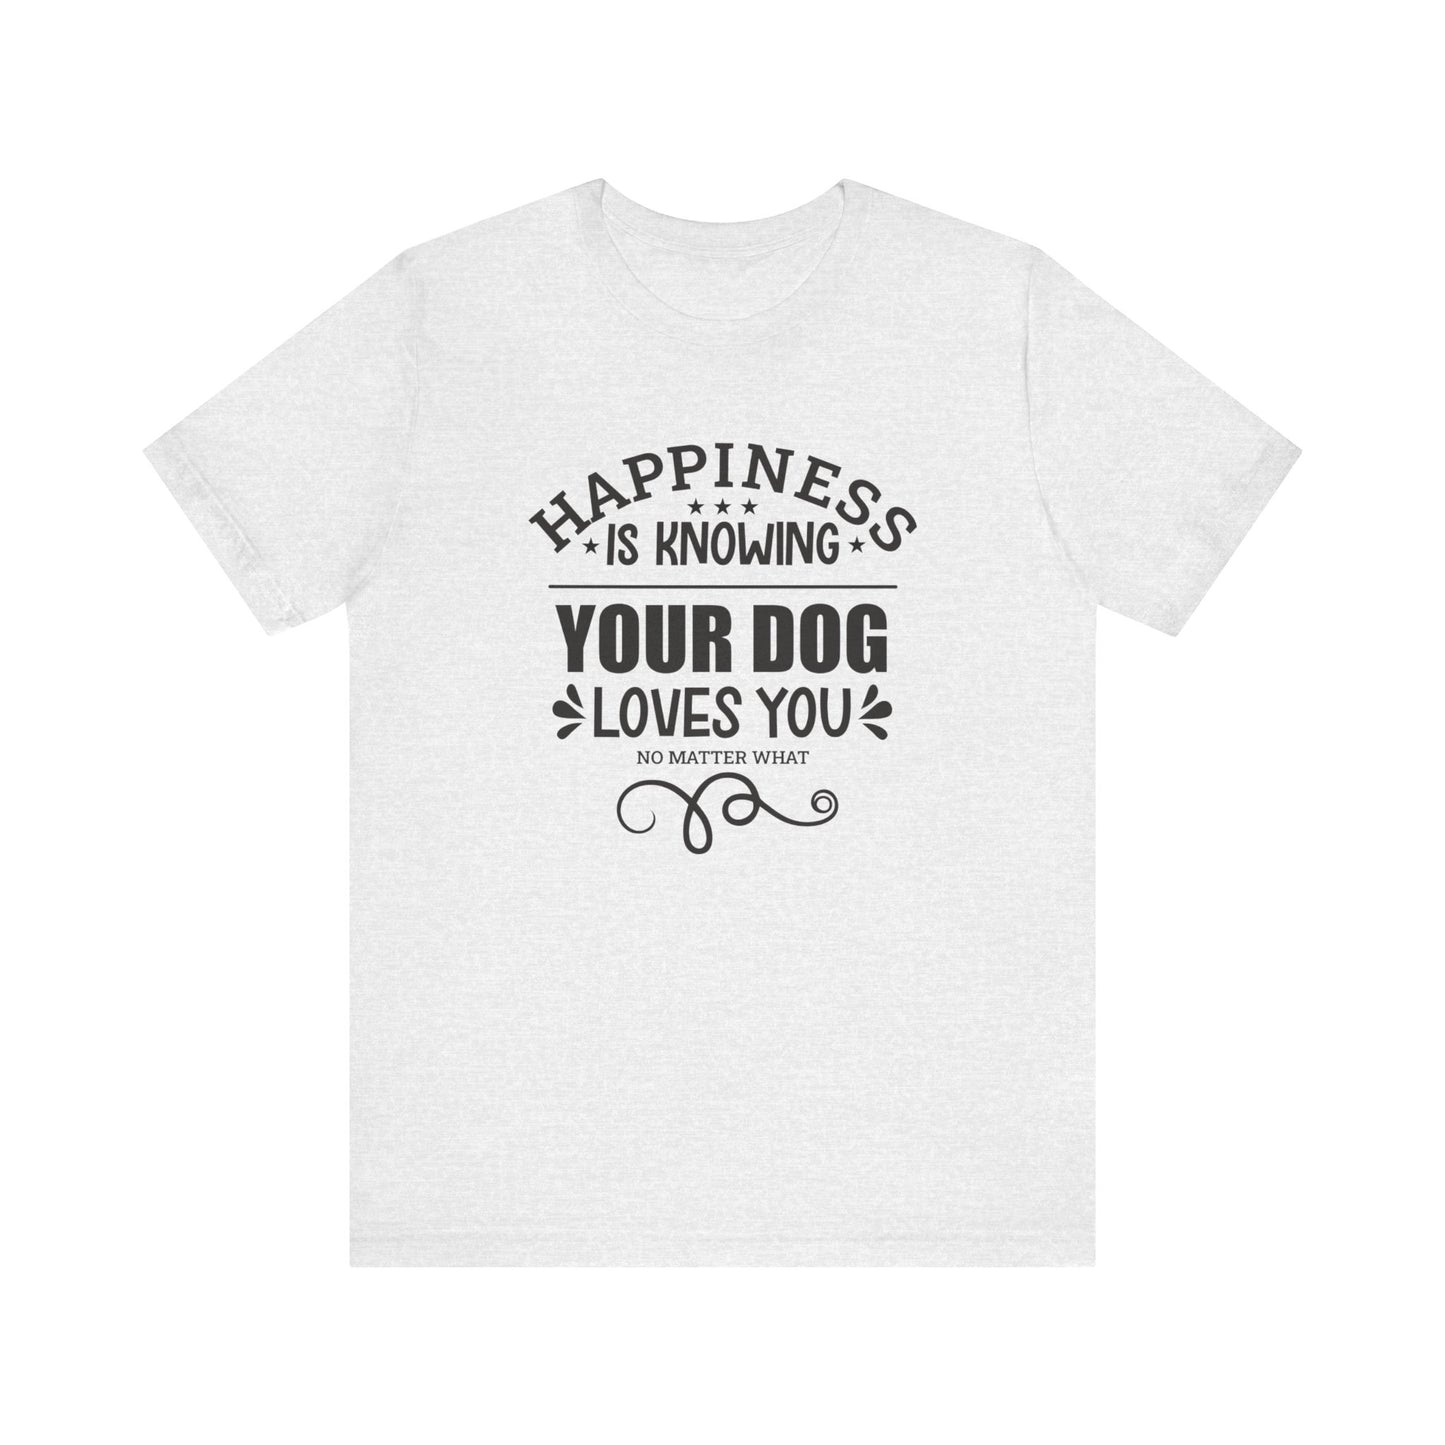 Surrounding a white canvas, rests a ash-colored unisex t-shirt, featuring the slogan 'Happiness is knowing your dog loves you no matter what,' by Dogs Pure Love.